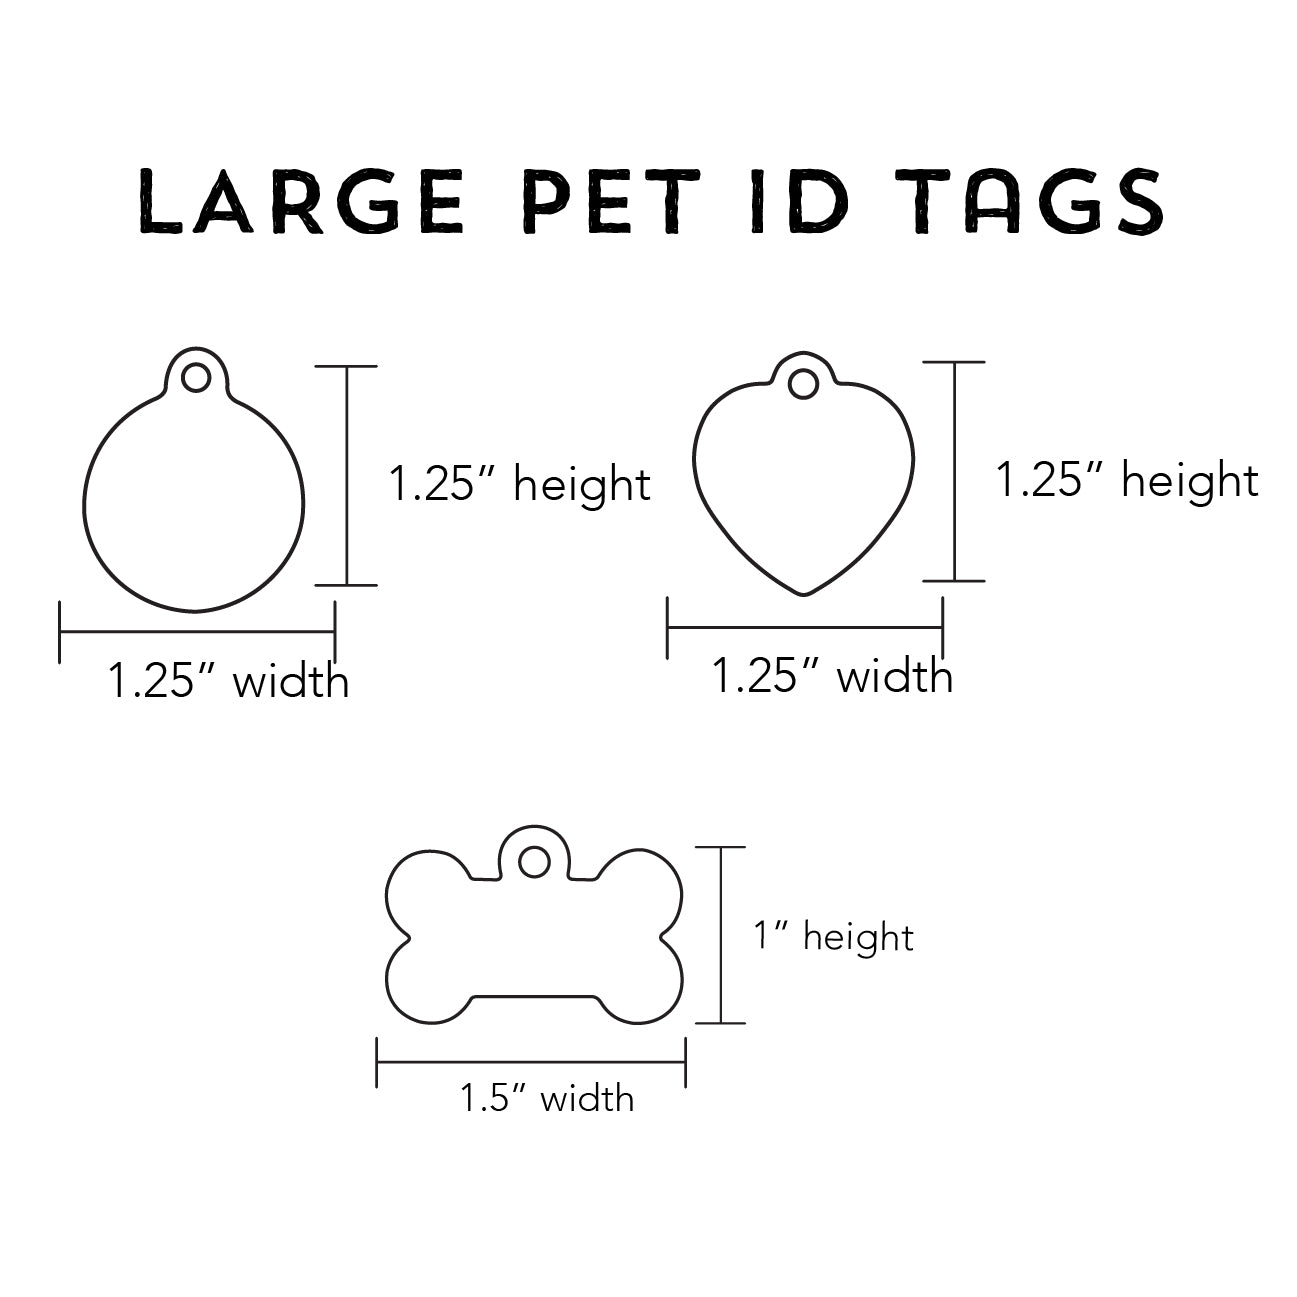 Fruit Cocktail Pet ID Tags